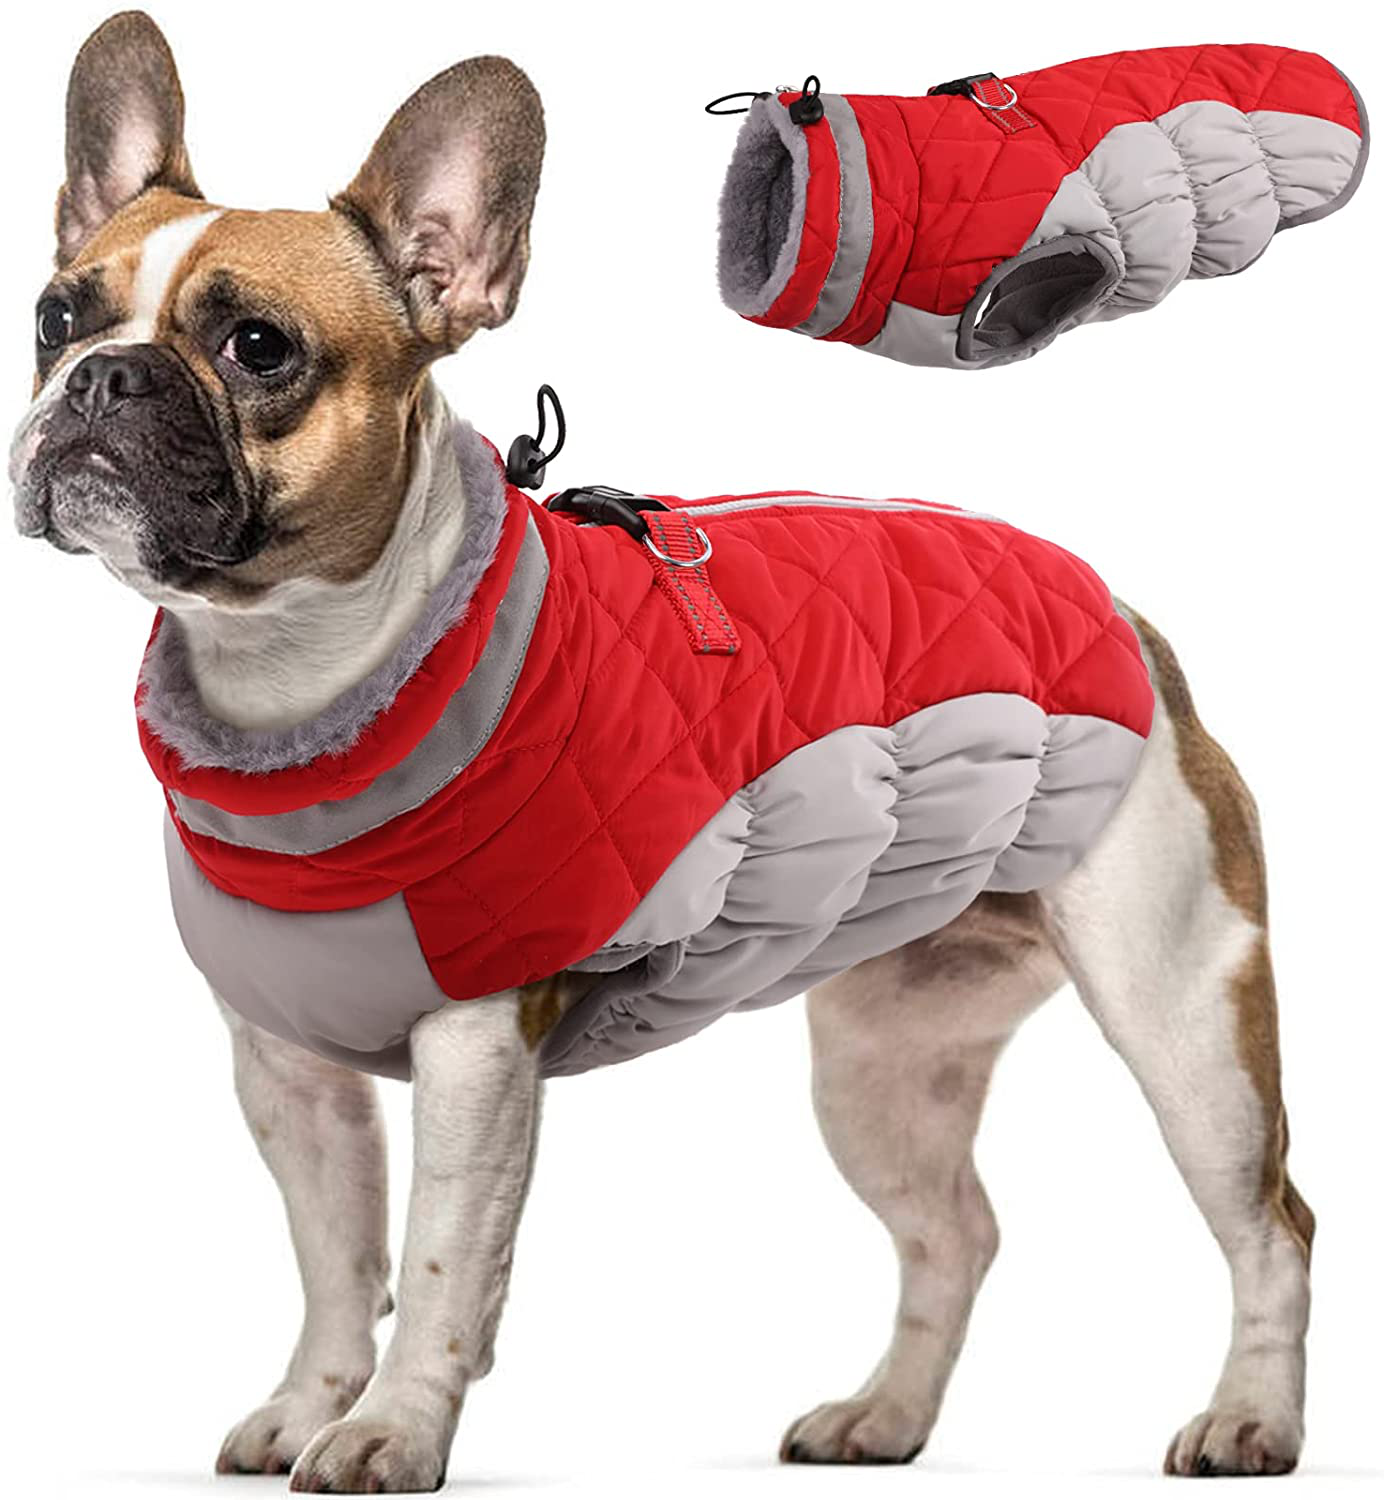 Dog Winter Jacket Cozy Reflective Waterproof Dog Coat Windproof Warm Pet Garment, Comfortable Cold Weather Fleece Apparel Outfits with Zipper Closure for Small Medium Large Dogs Puppy Walking Hiking